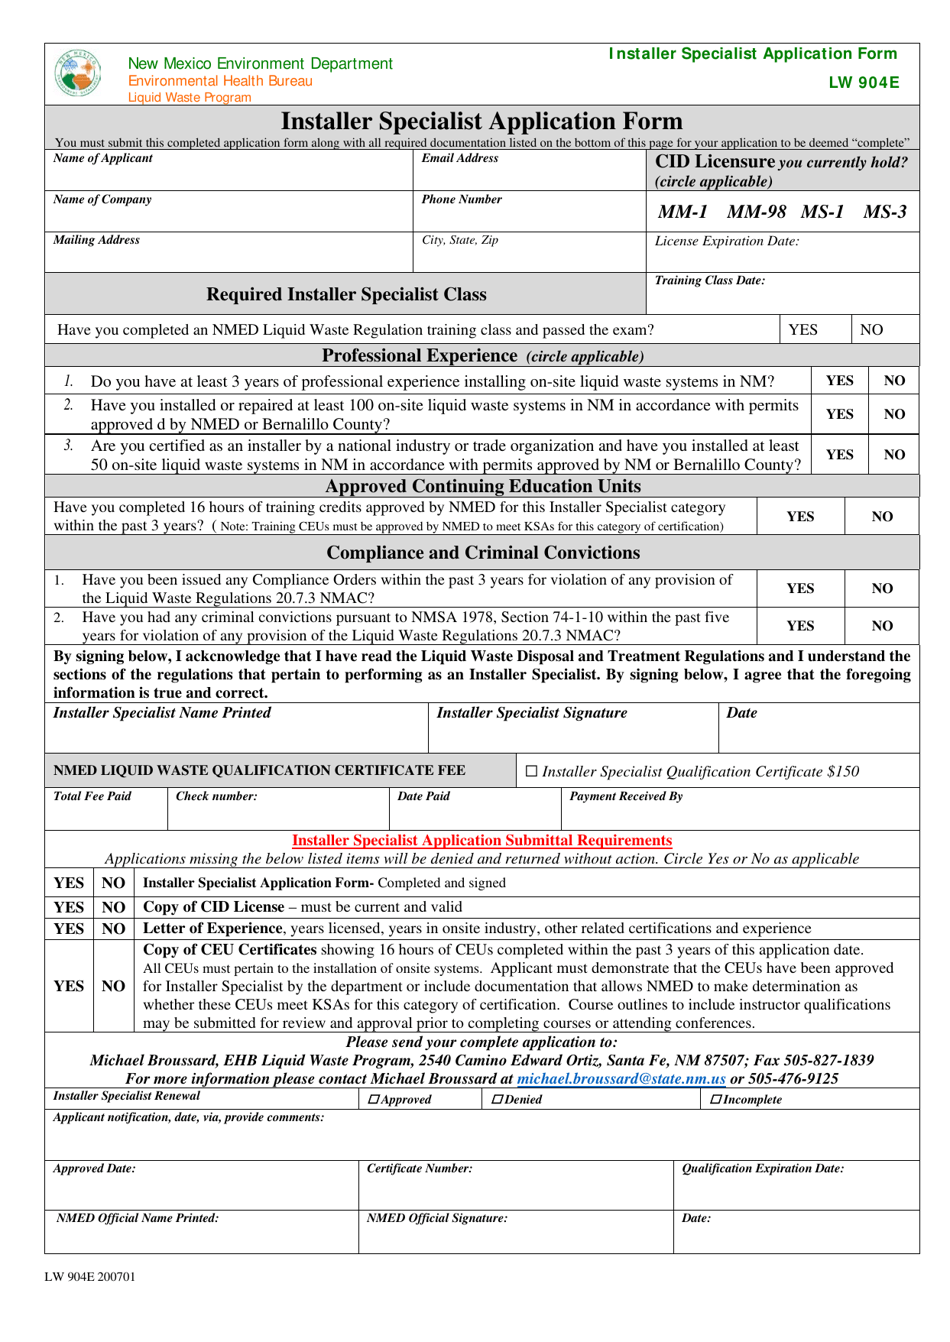 Form LW904E Installer Specialist Application Form - New Mexico, Page 1